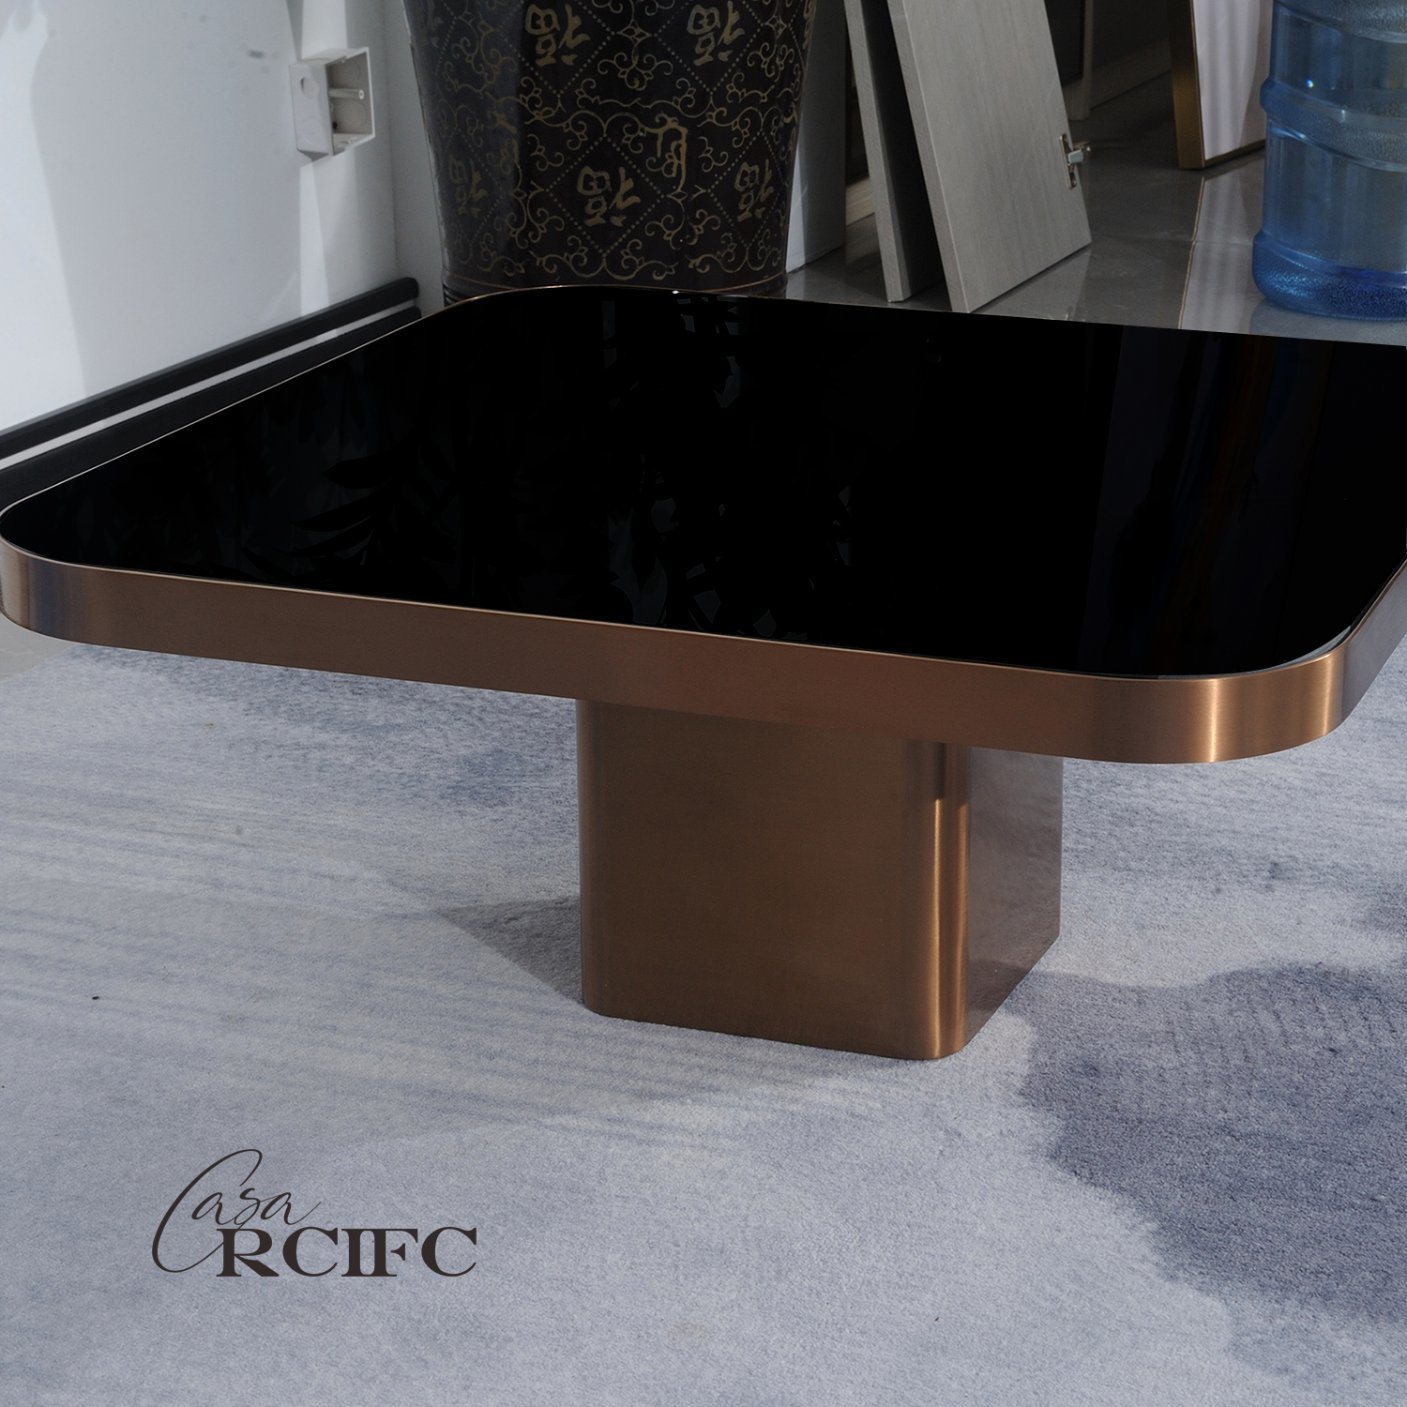 Luxury Stainless Steel Combination Coffee Table